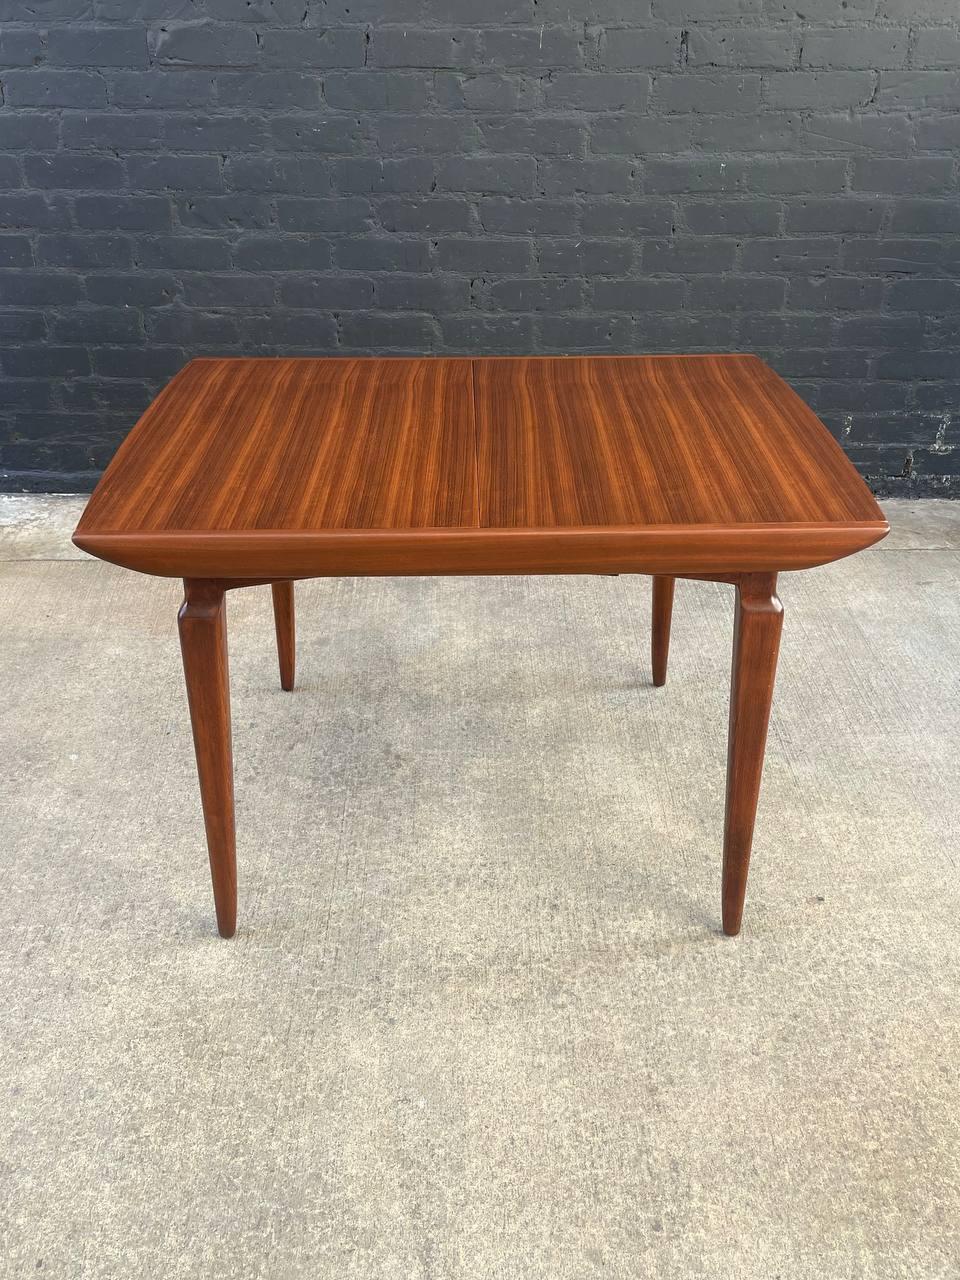 Newly Refinished - Mid-Century Modern “Link” Expanding Teak Dining Table In Excellent Condition For Sale In Los Angeles, CA